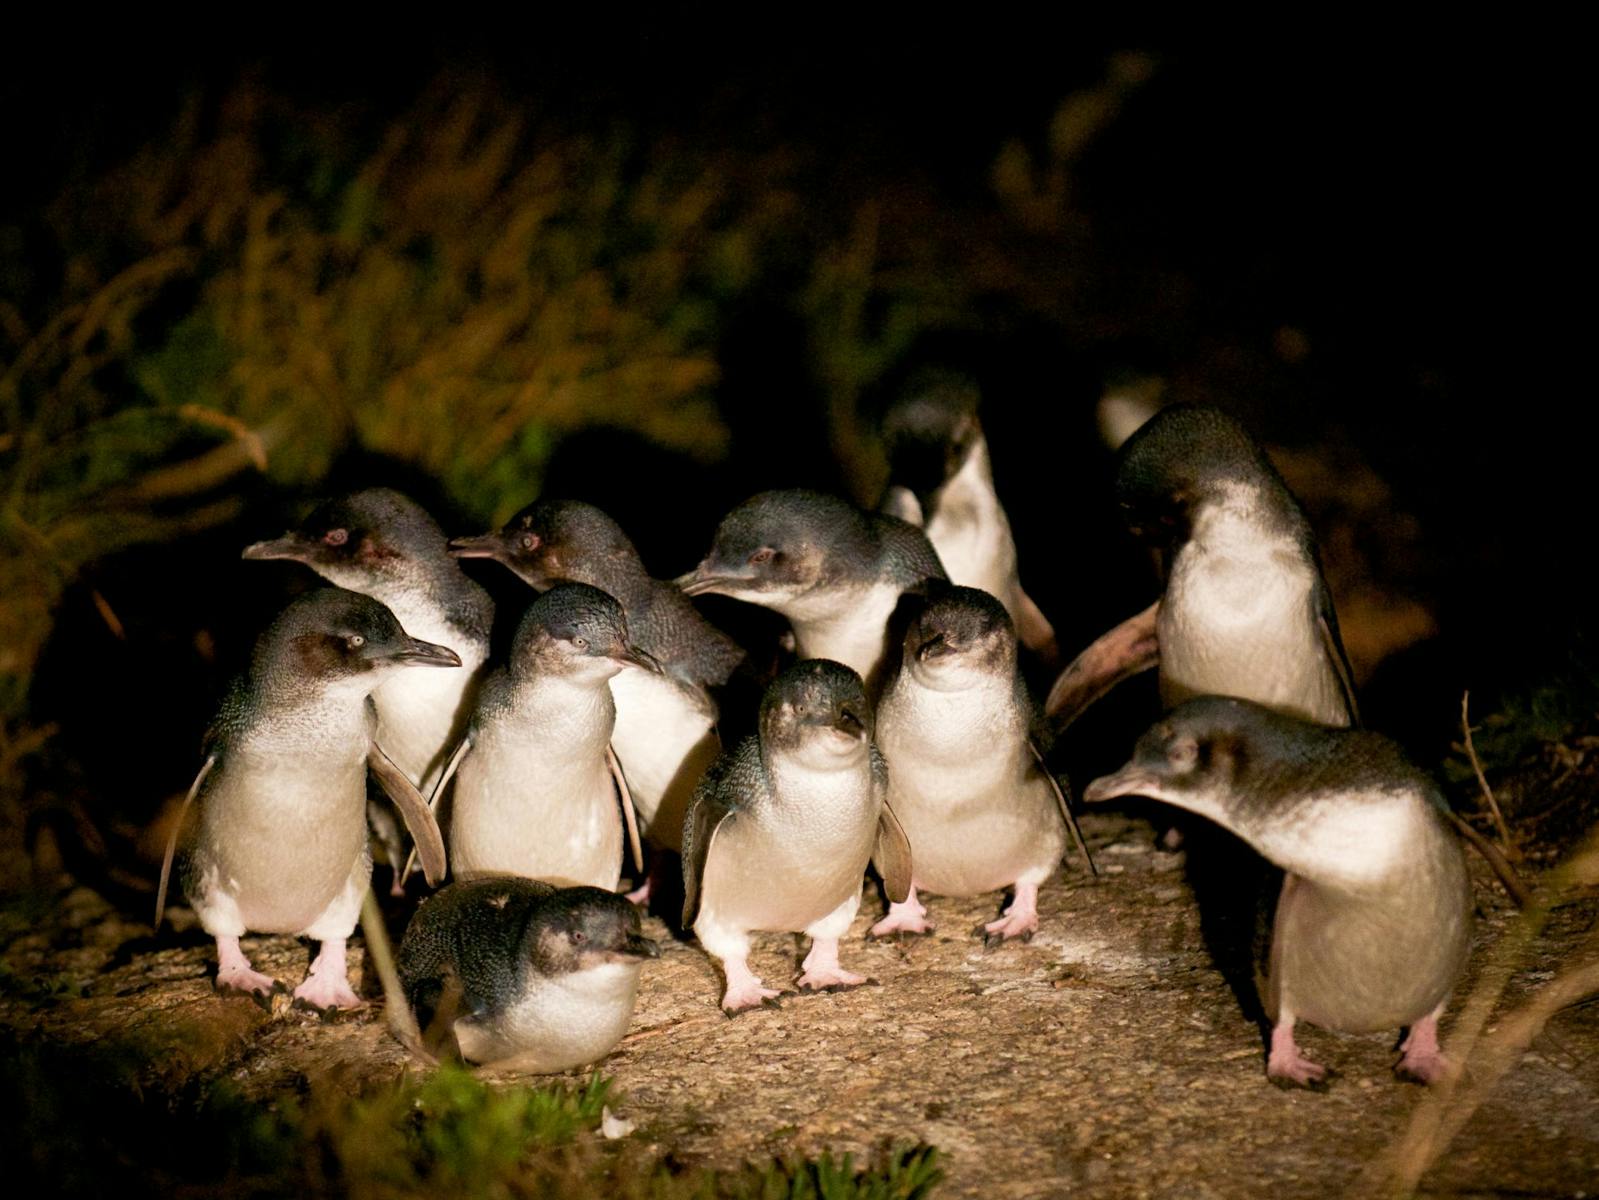 A Group of Penguins Heading Home!